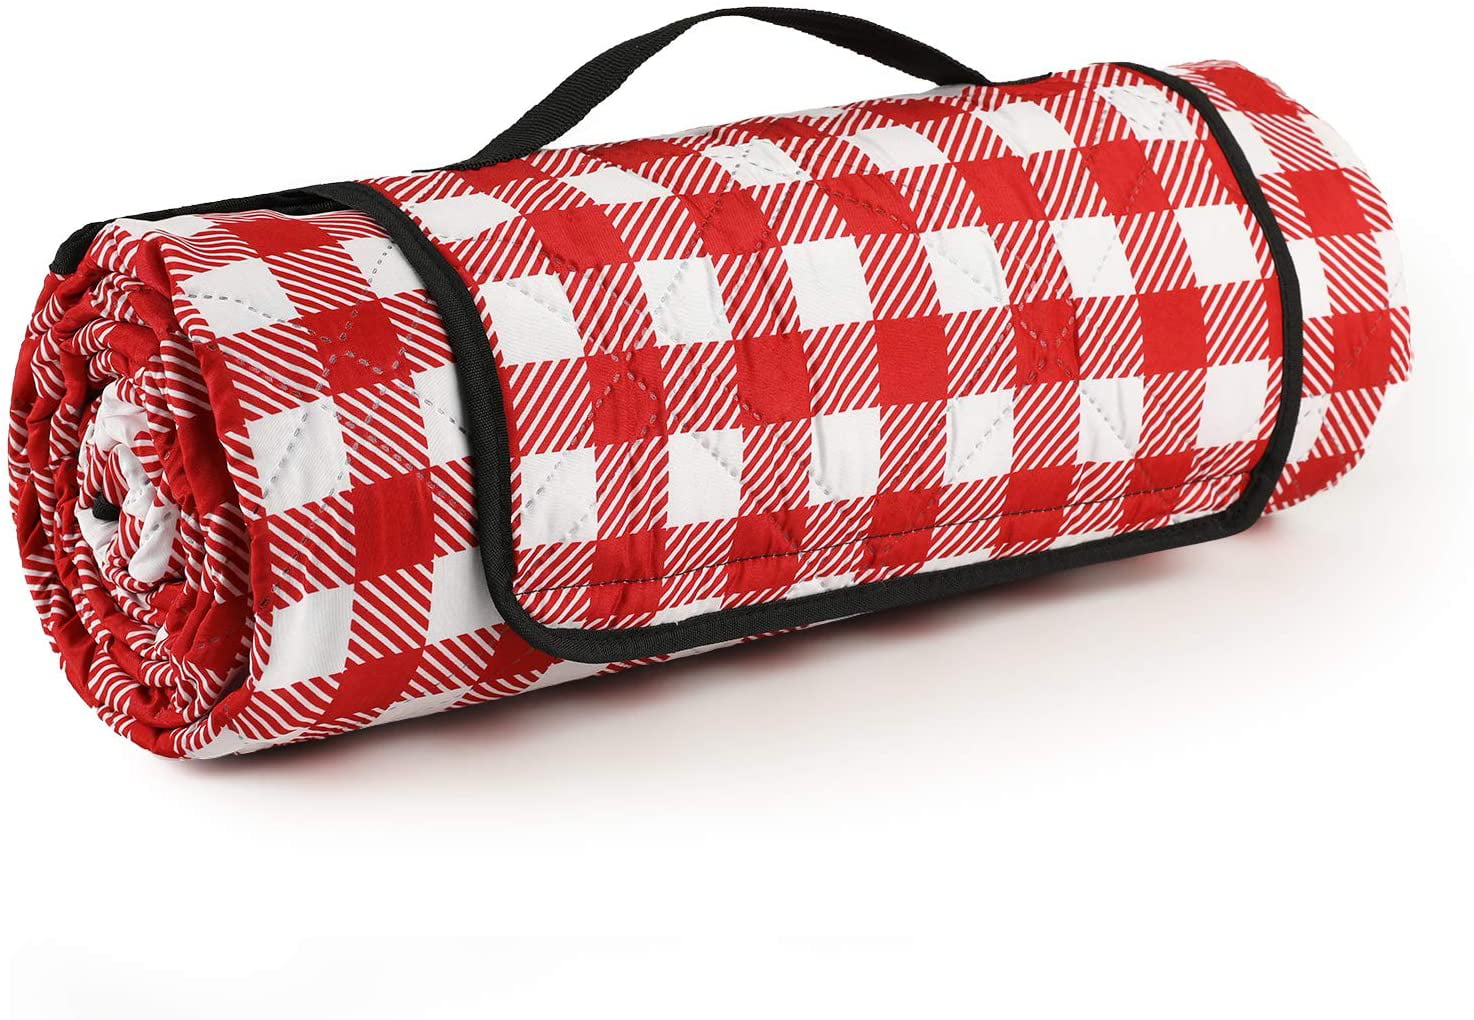 Folding Picnic Mat Outdoor Camping Beach Moisture-proof Blanket Portable 79*79in 